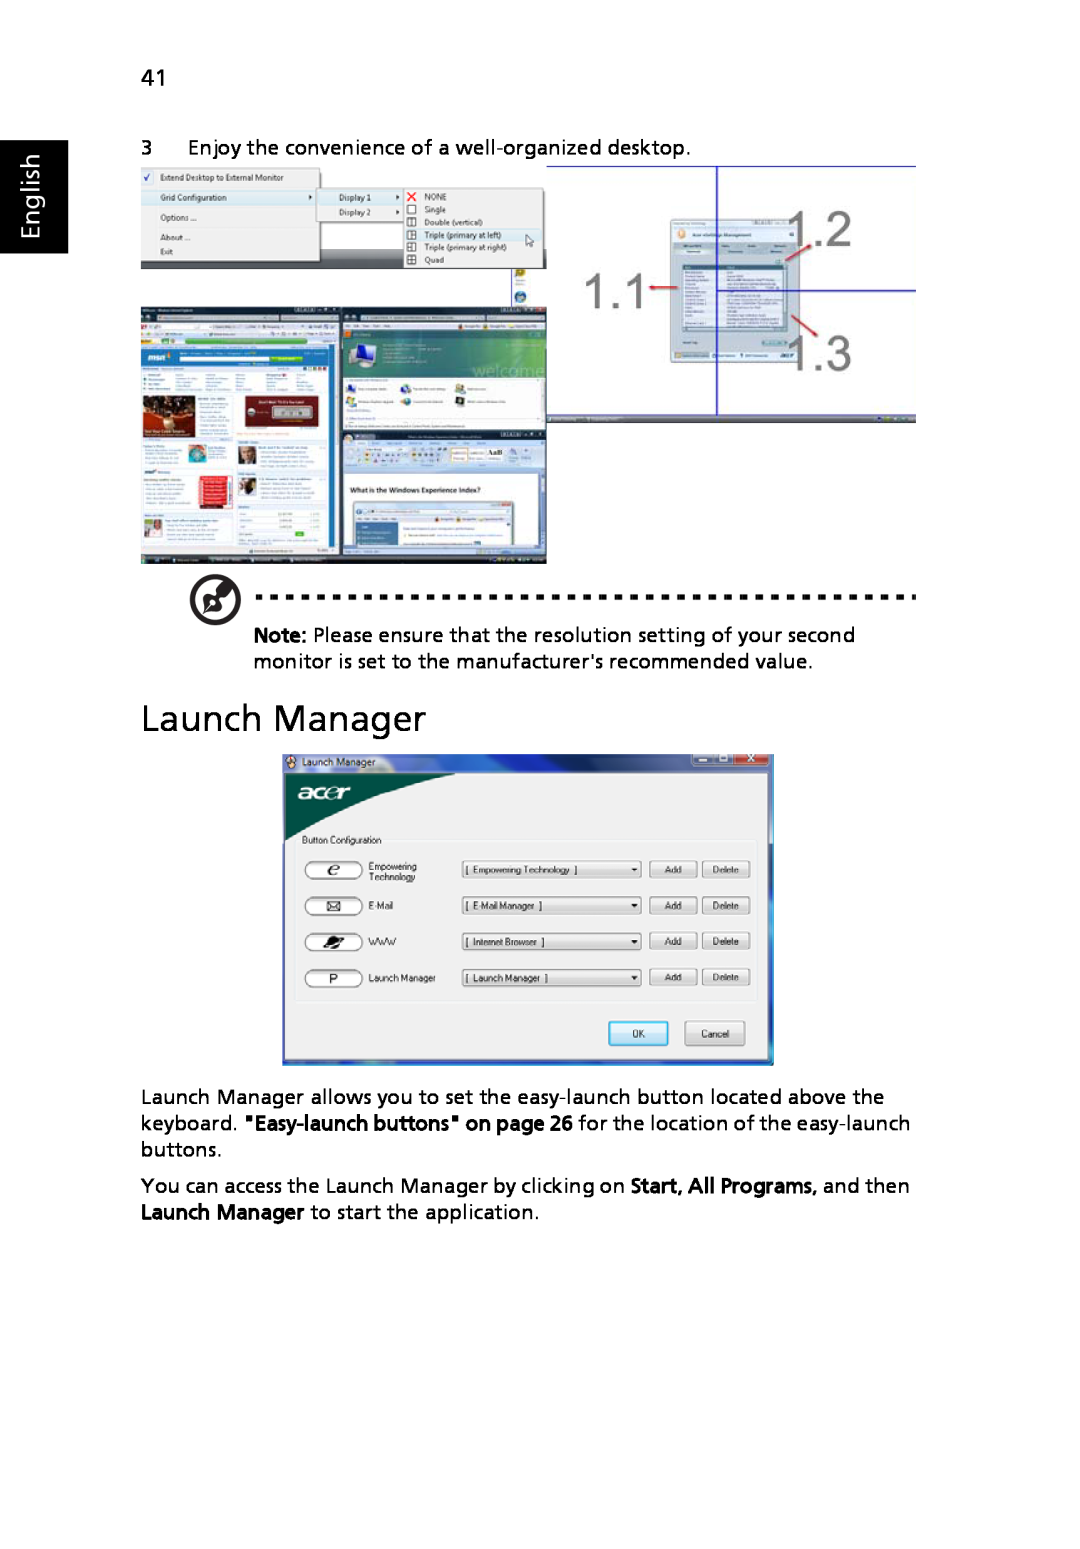 Acer 8920 Series, LE1 manual Launch Manager, English 